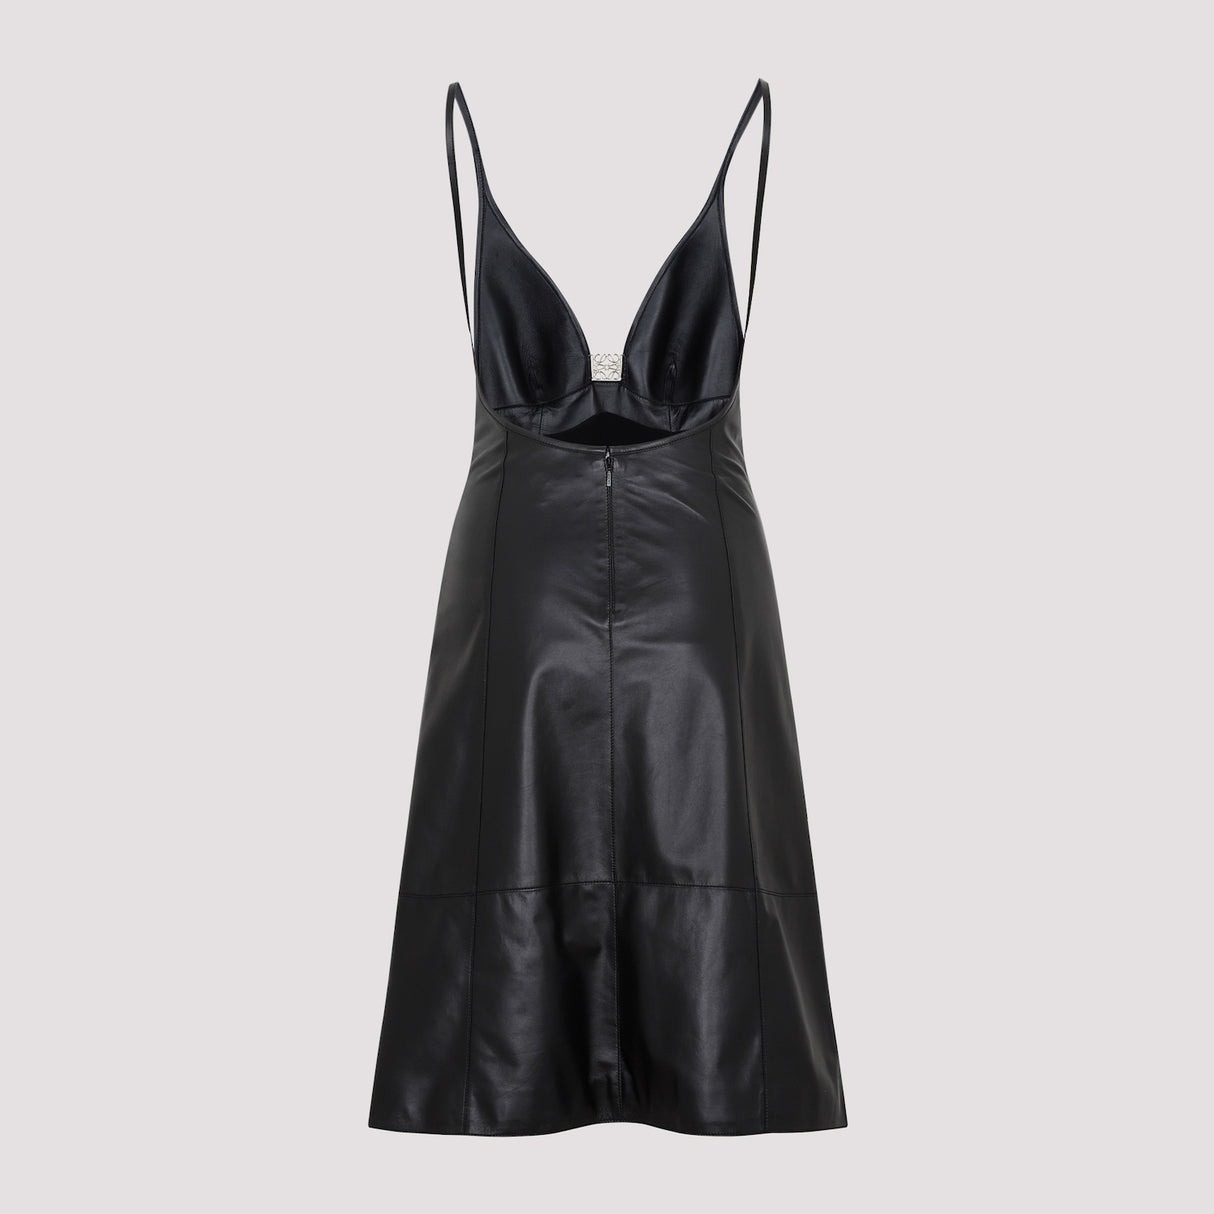 LOEWE Strappy Black Leather Dress for Women - SS23 Collection